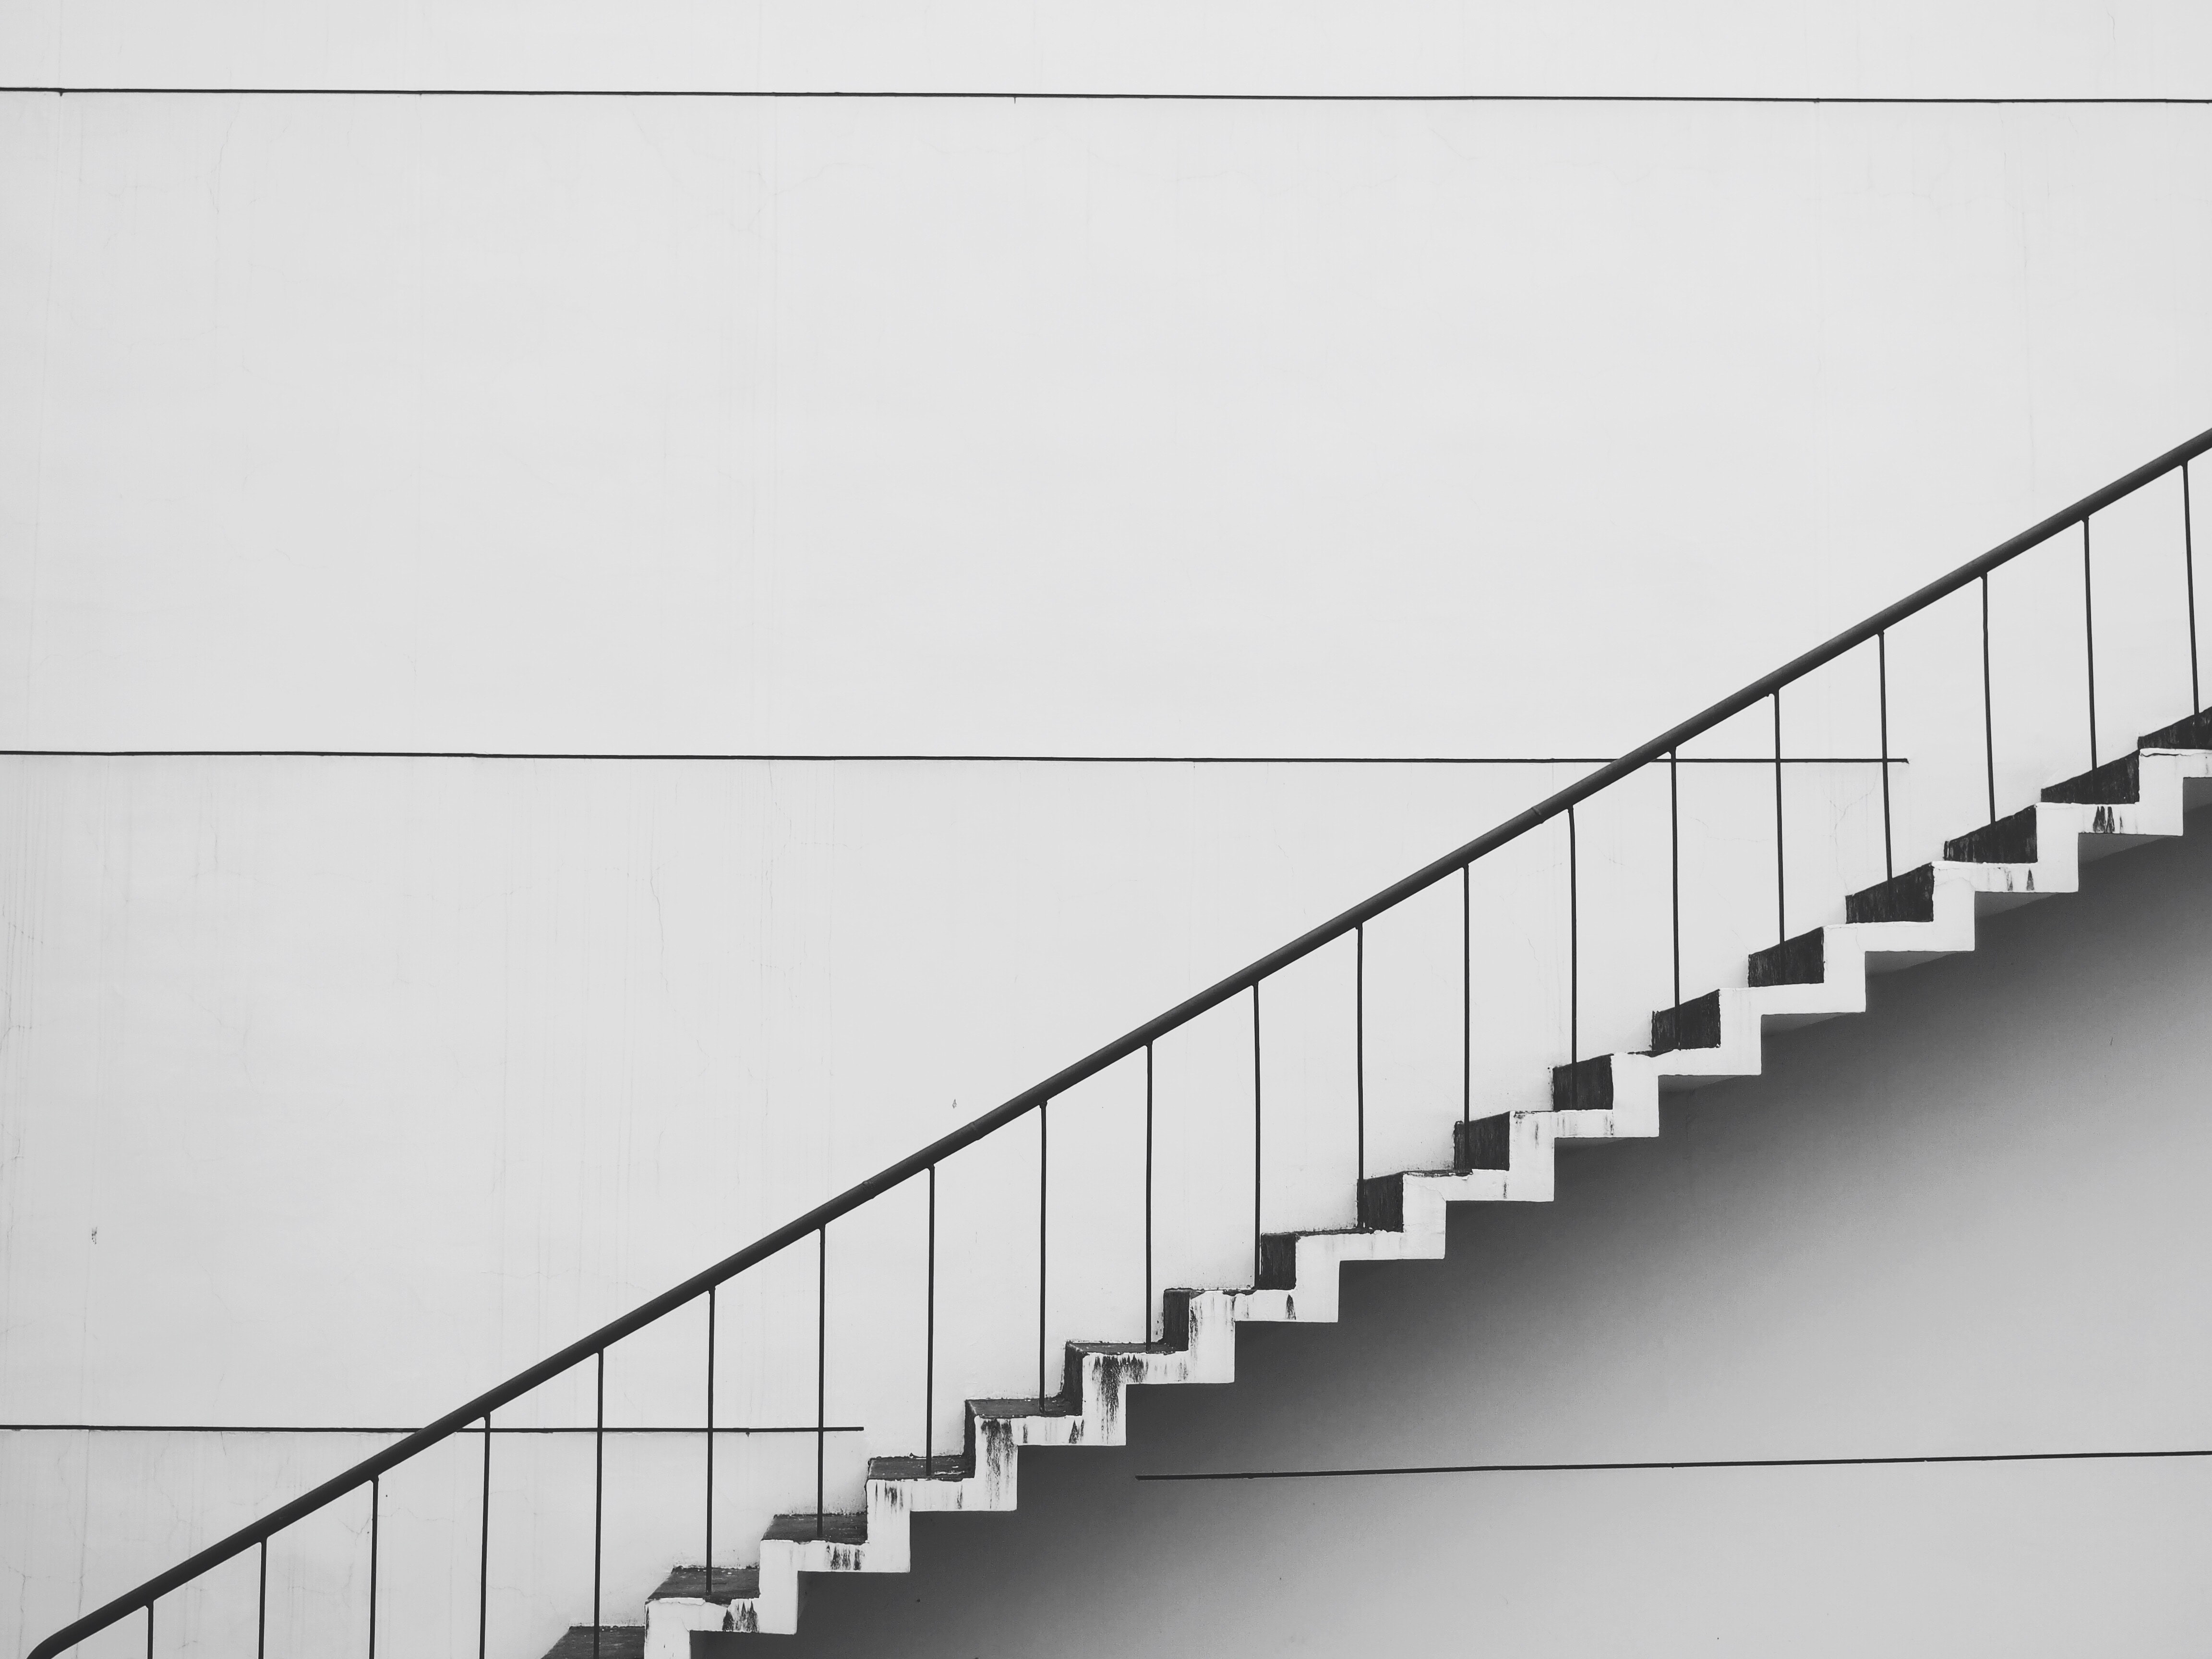 Free stock photos of stairs · Pexels